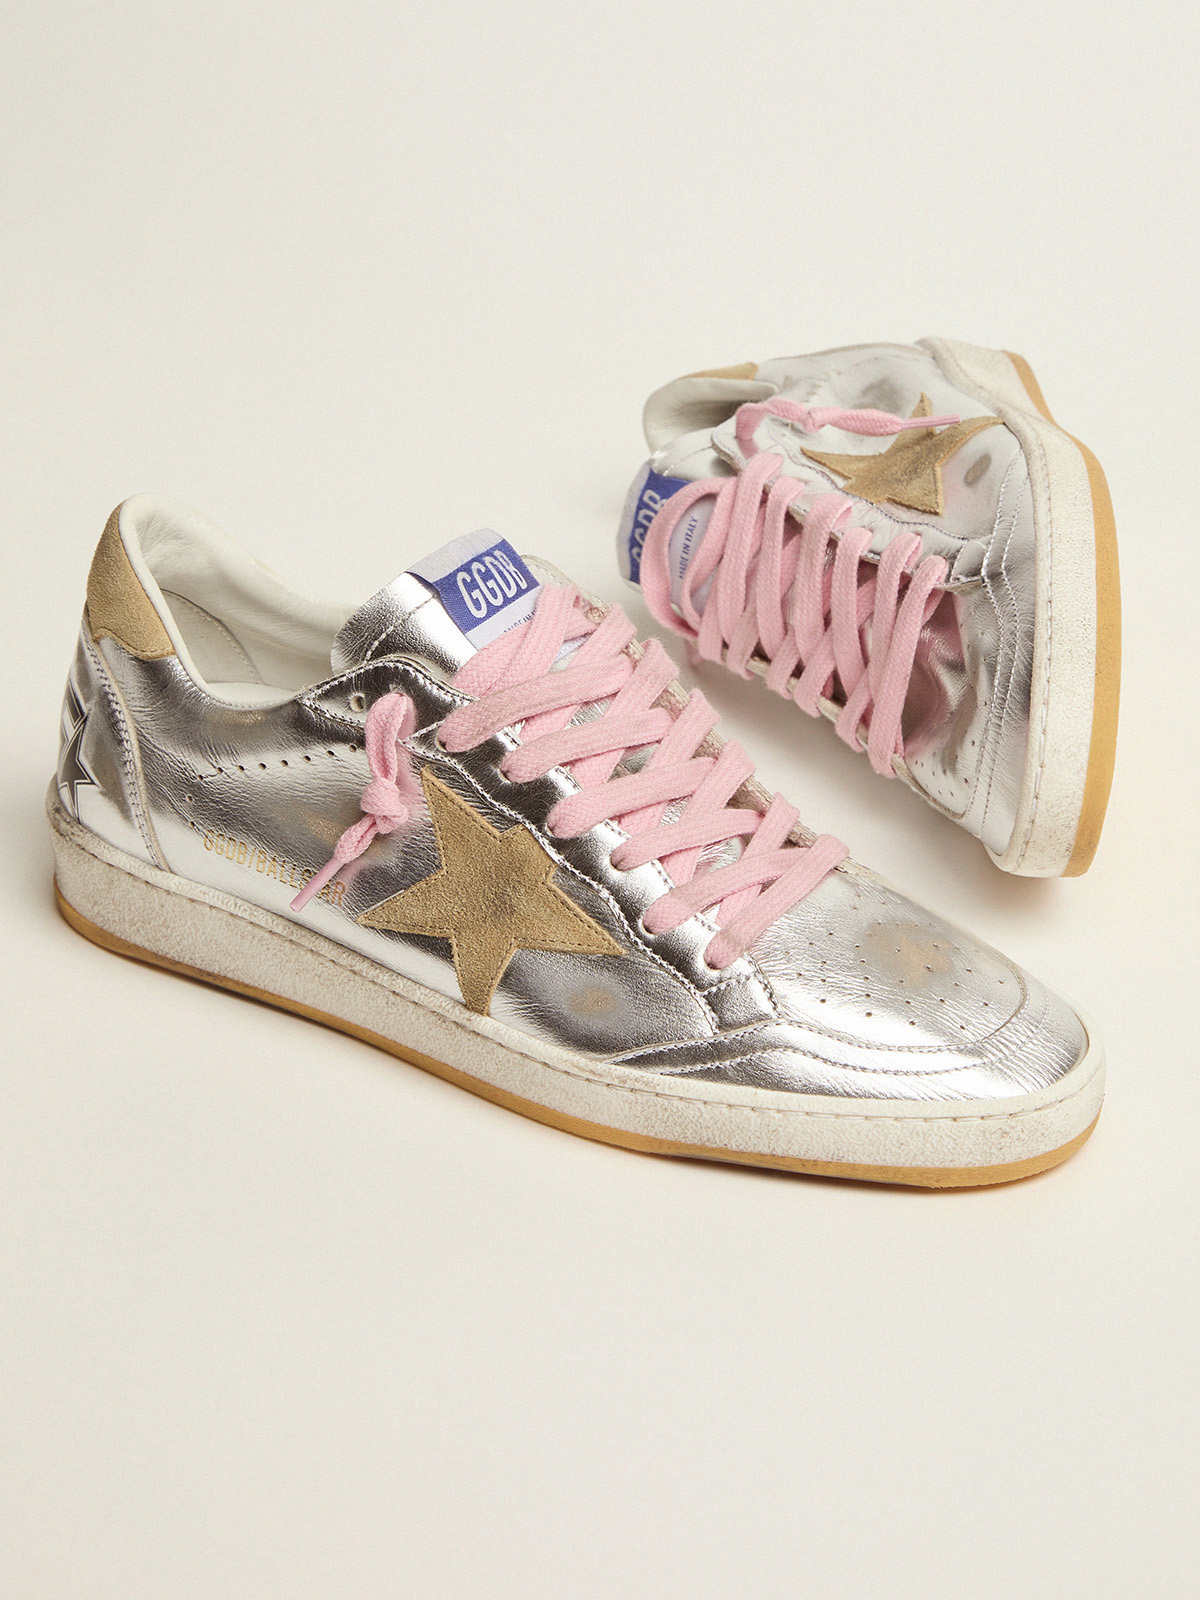 Ball Star LTD sneakers in silver laminated leather with suede details |  Golden Goose